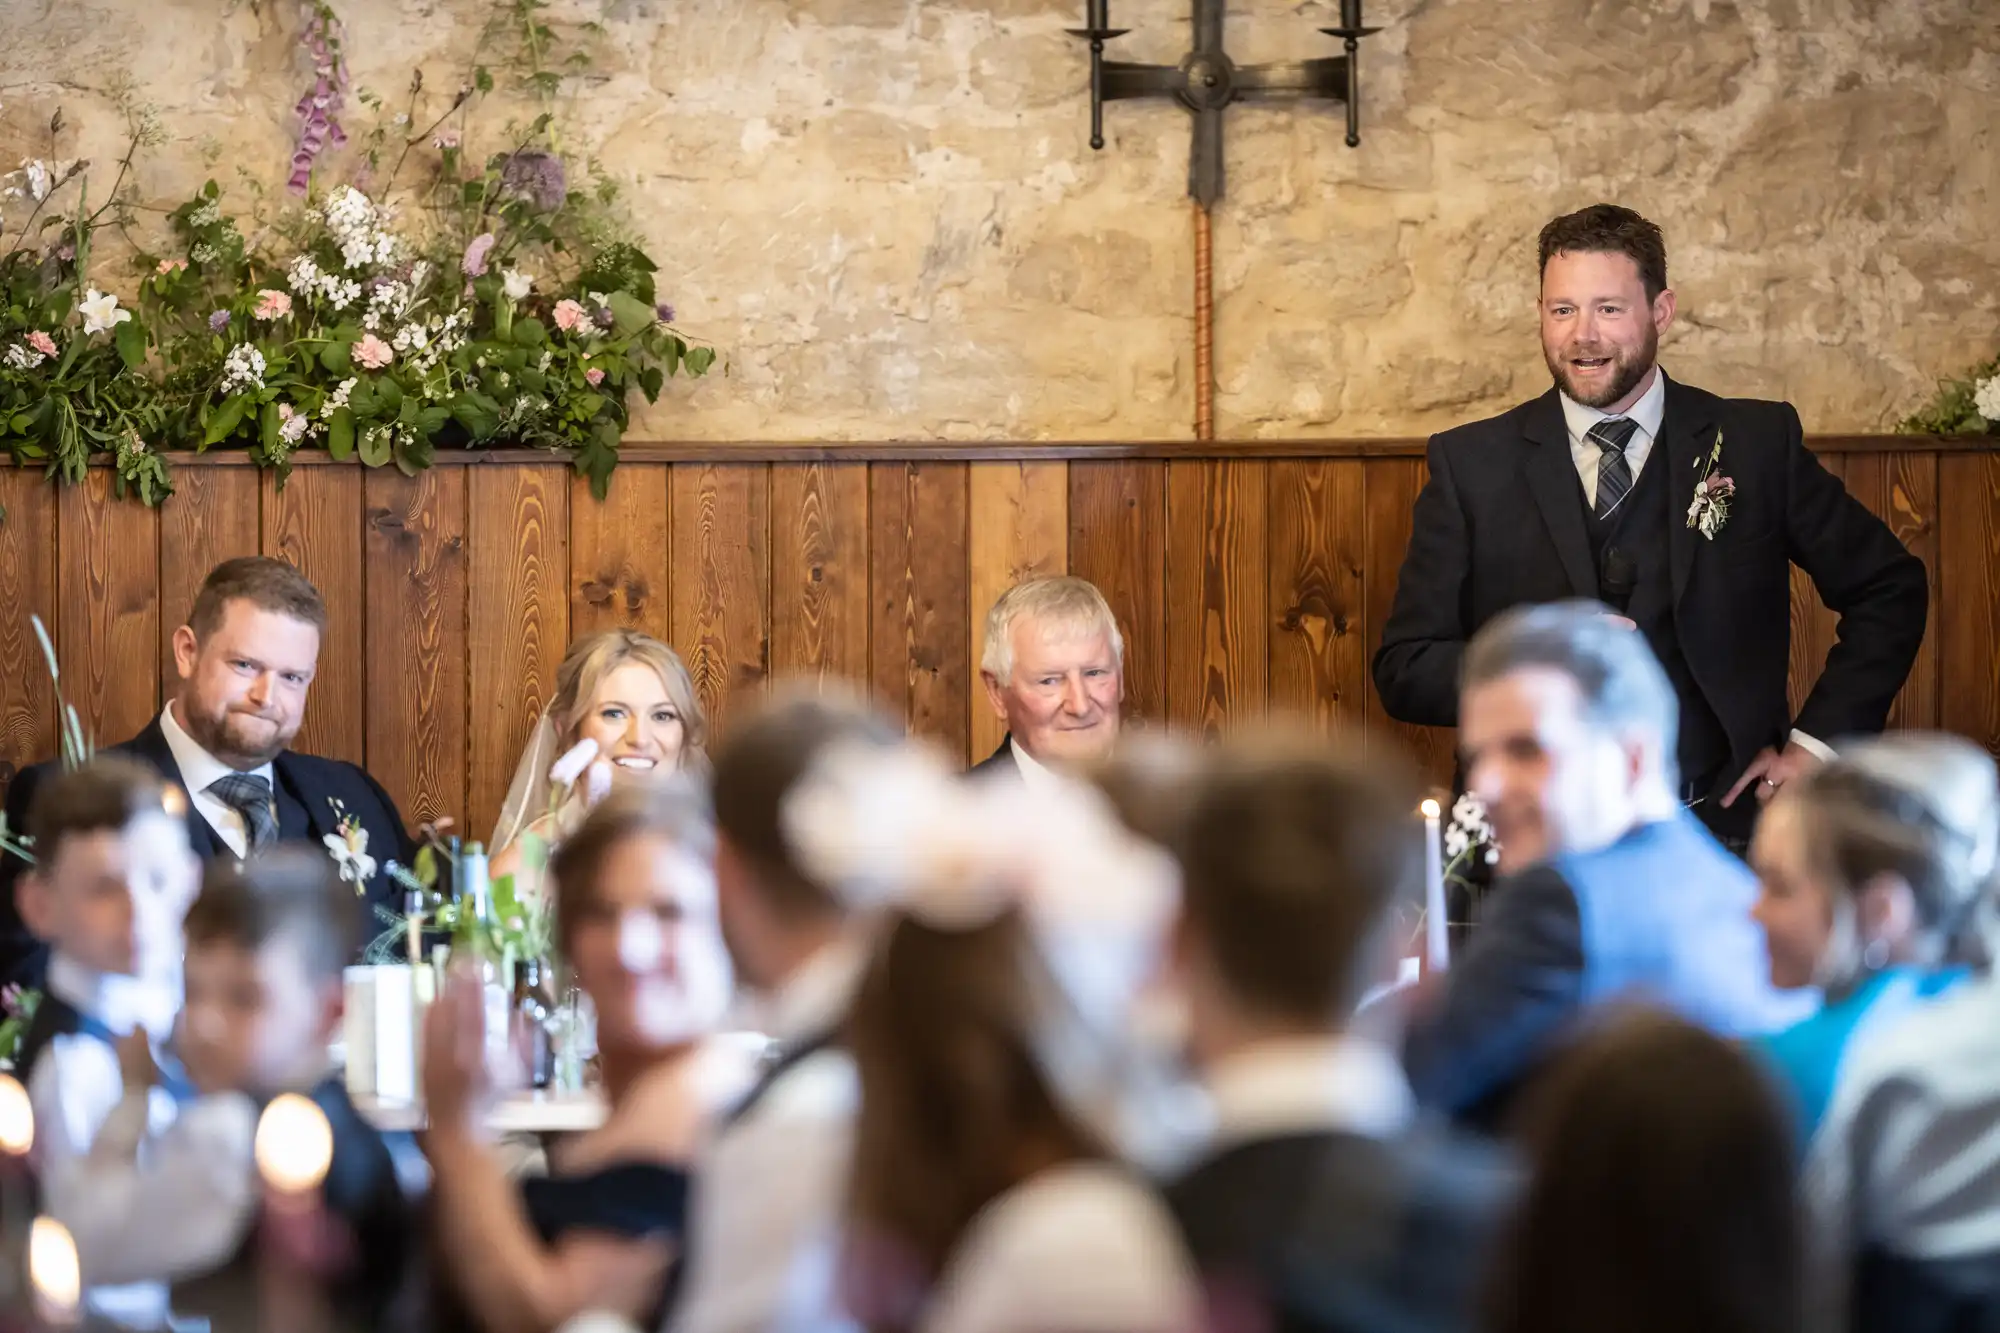 A man stands smiling at a wedding reception, with seated guests focused on him, in a rustic hall with flower arrangements.